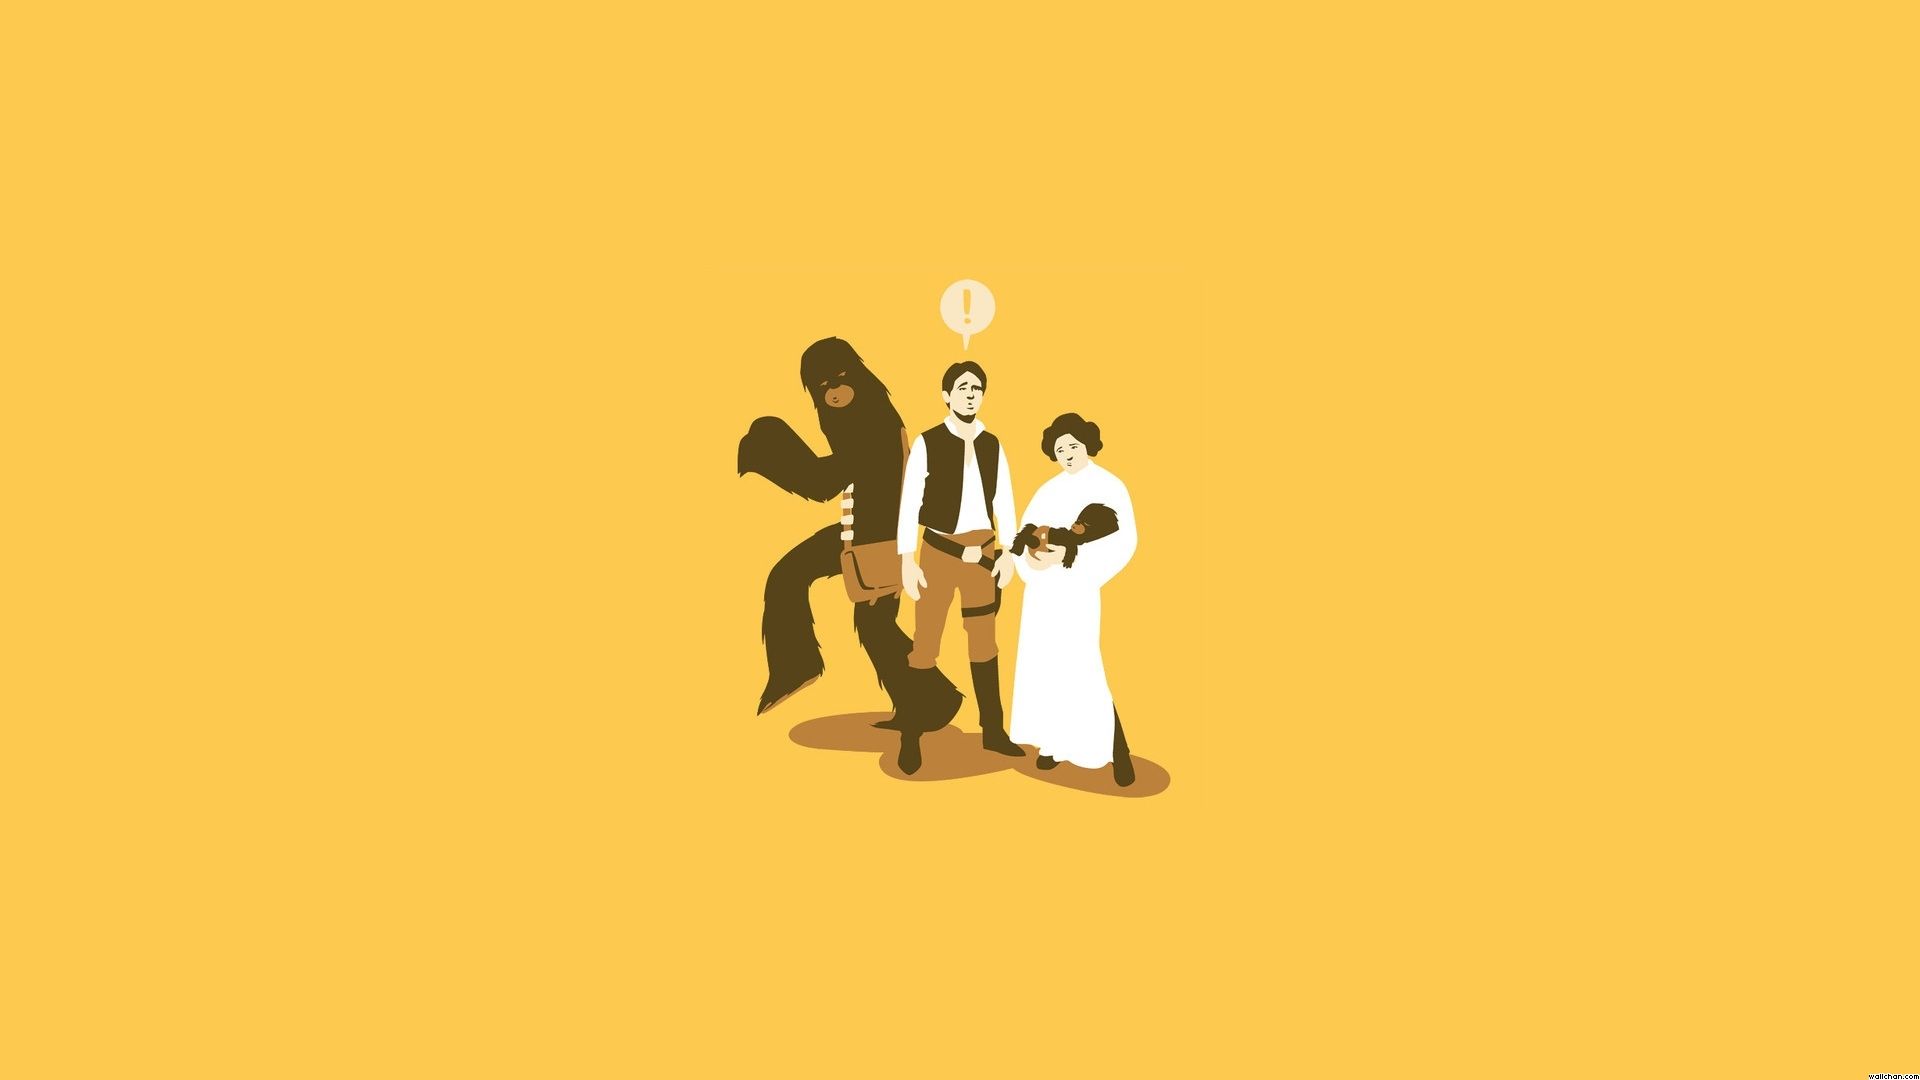 News and entertainment: star wars funny (Jan 05 2013 15:19:33)